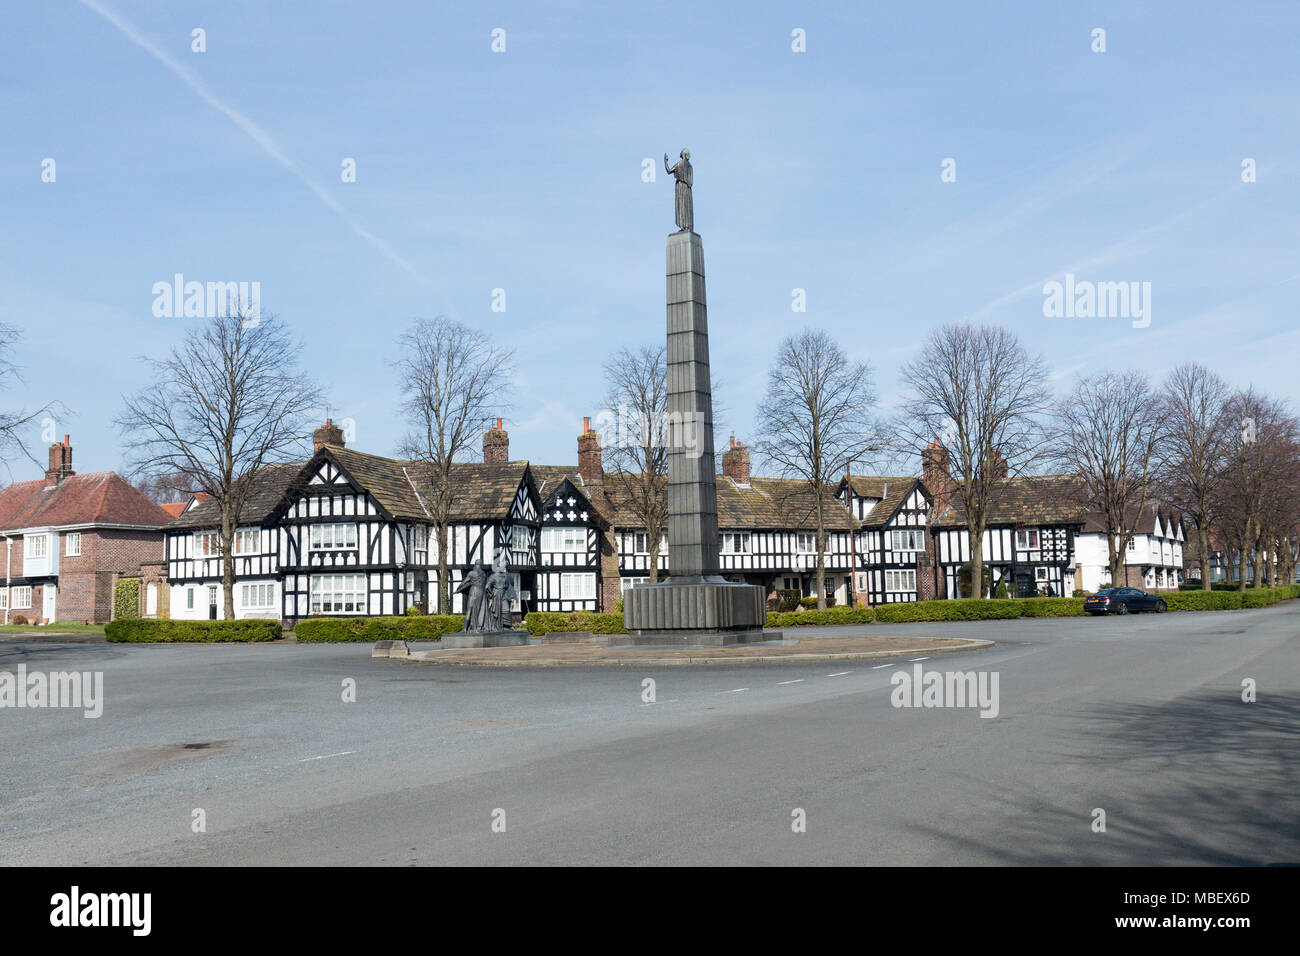 The Leverhulme Memorial, at Port Sunlight, outside the Lady Lever Art Gallery.  It was designer by James Lomax-Simpson. Stock Photo